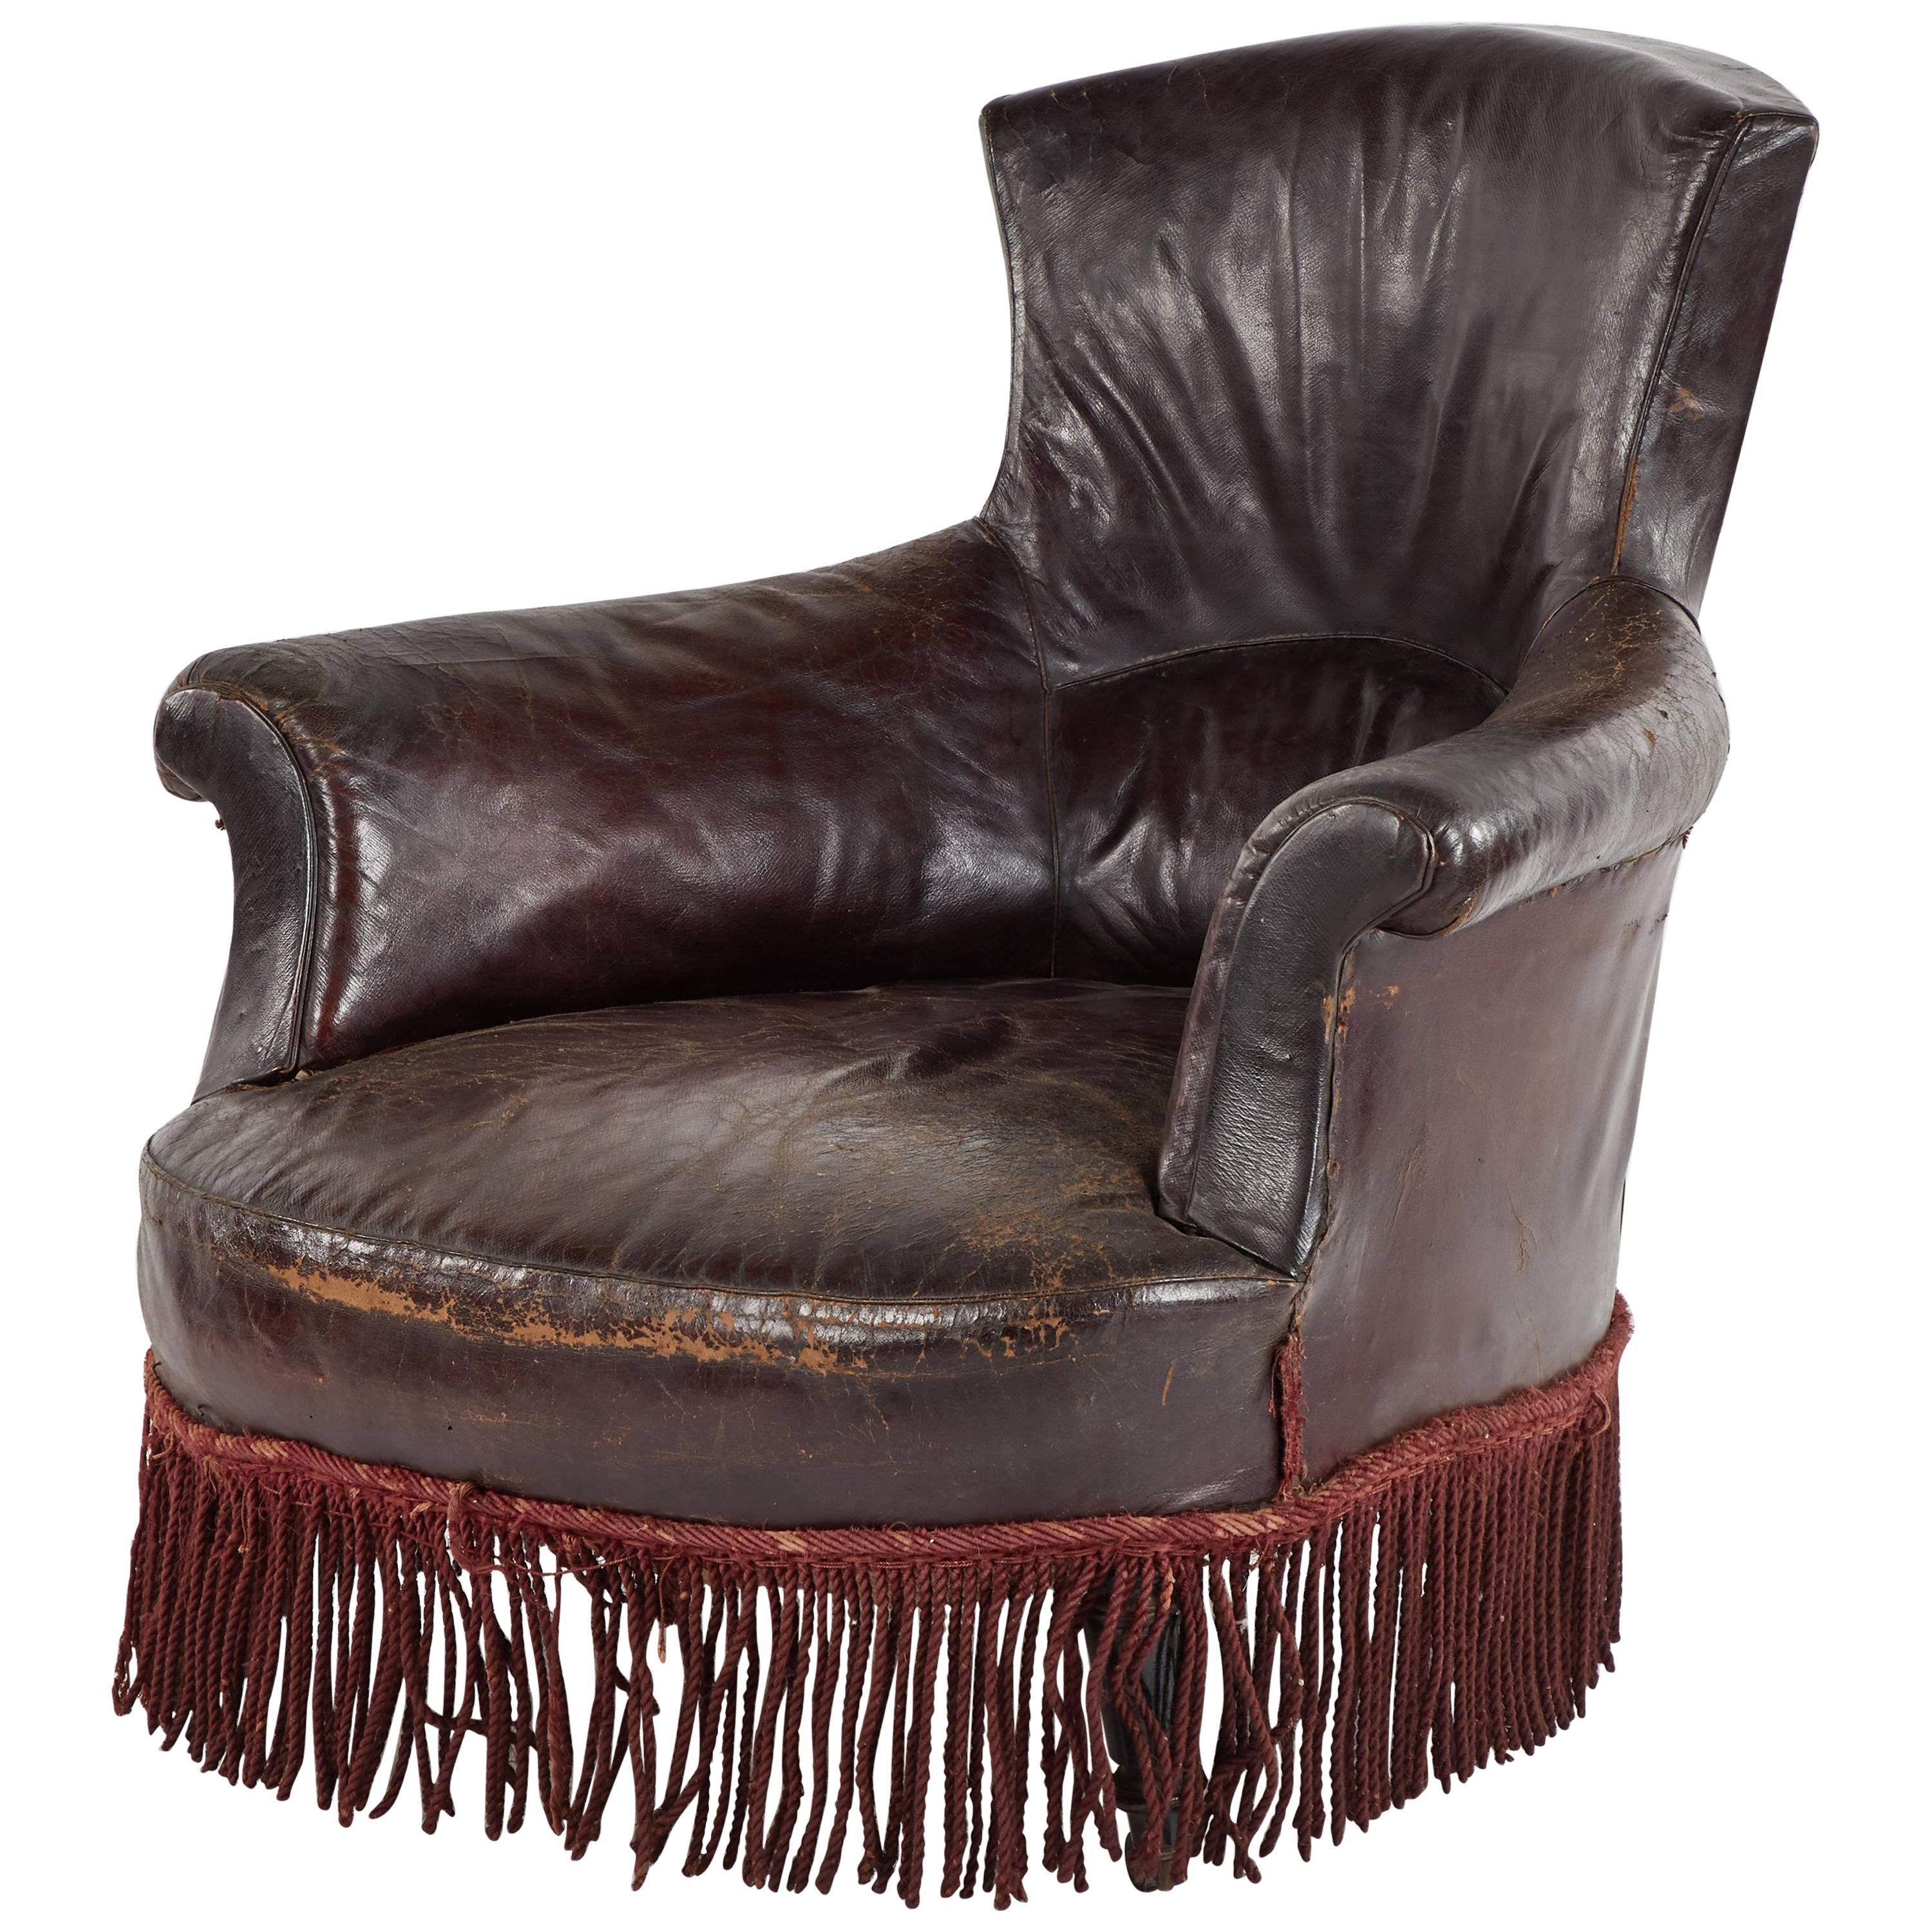 Early 20th Century French Leather Armchair with Fringe